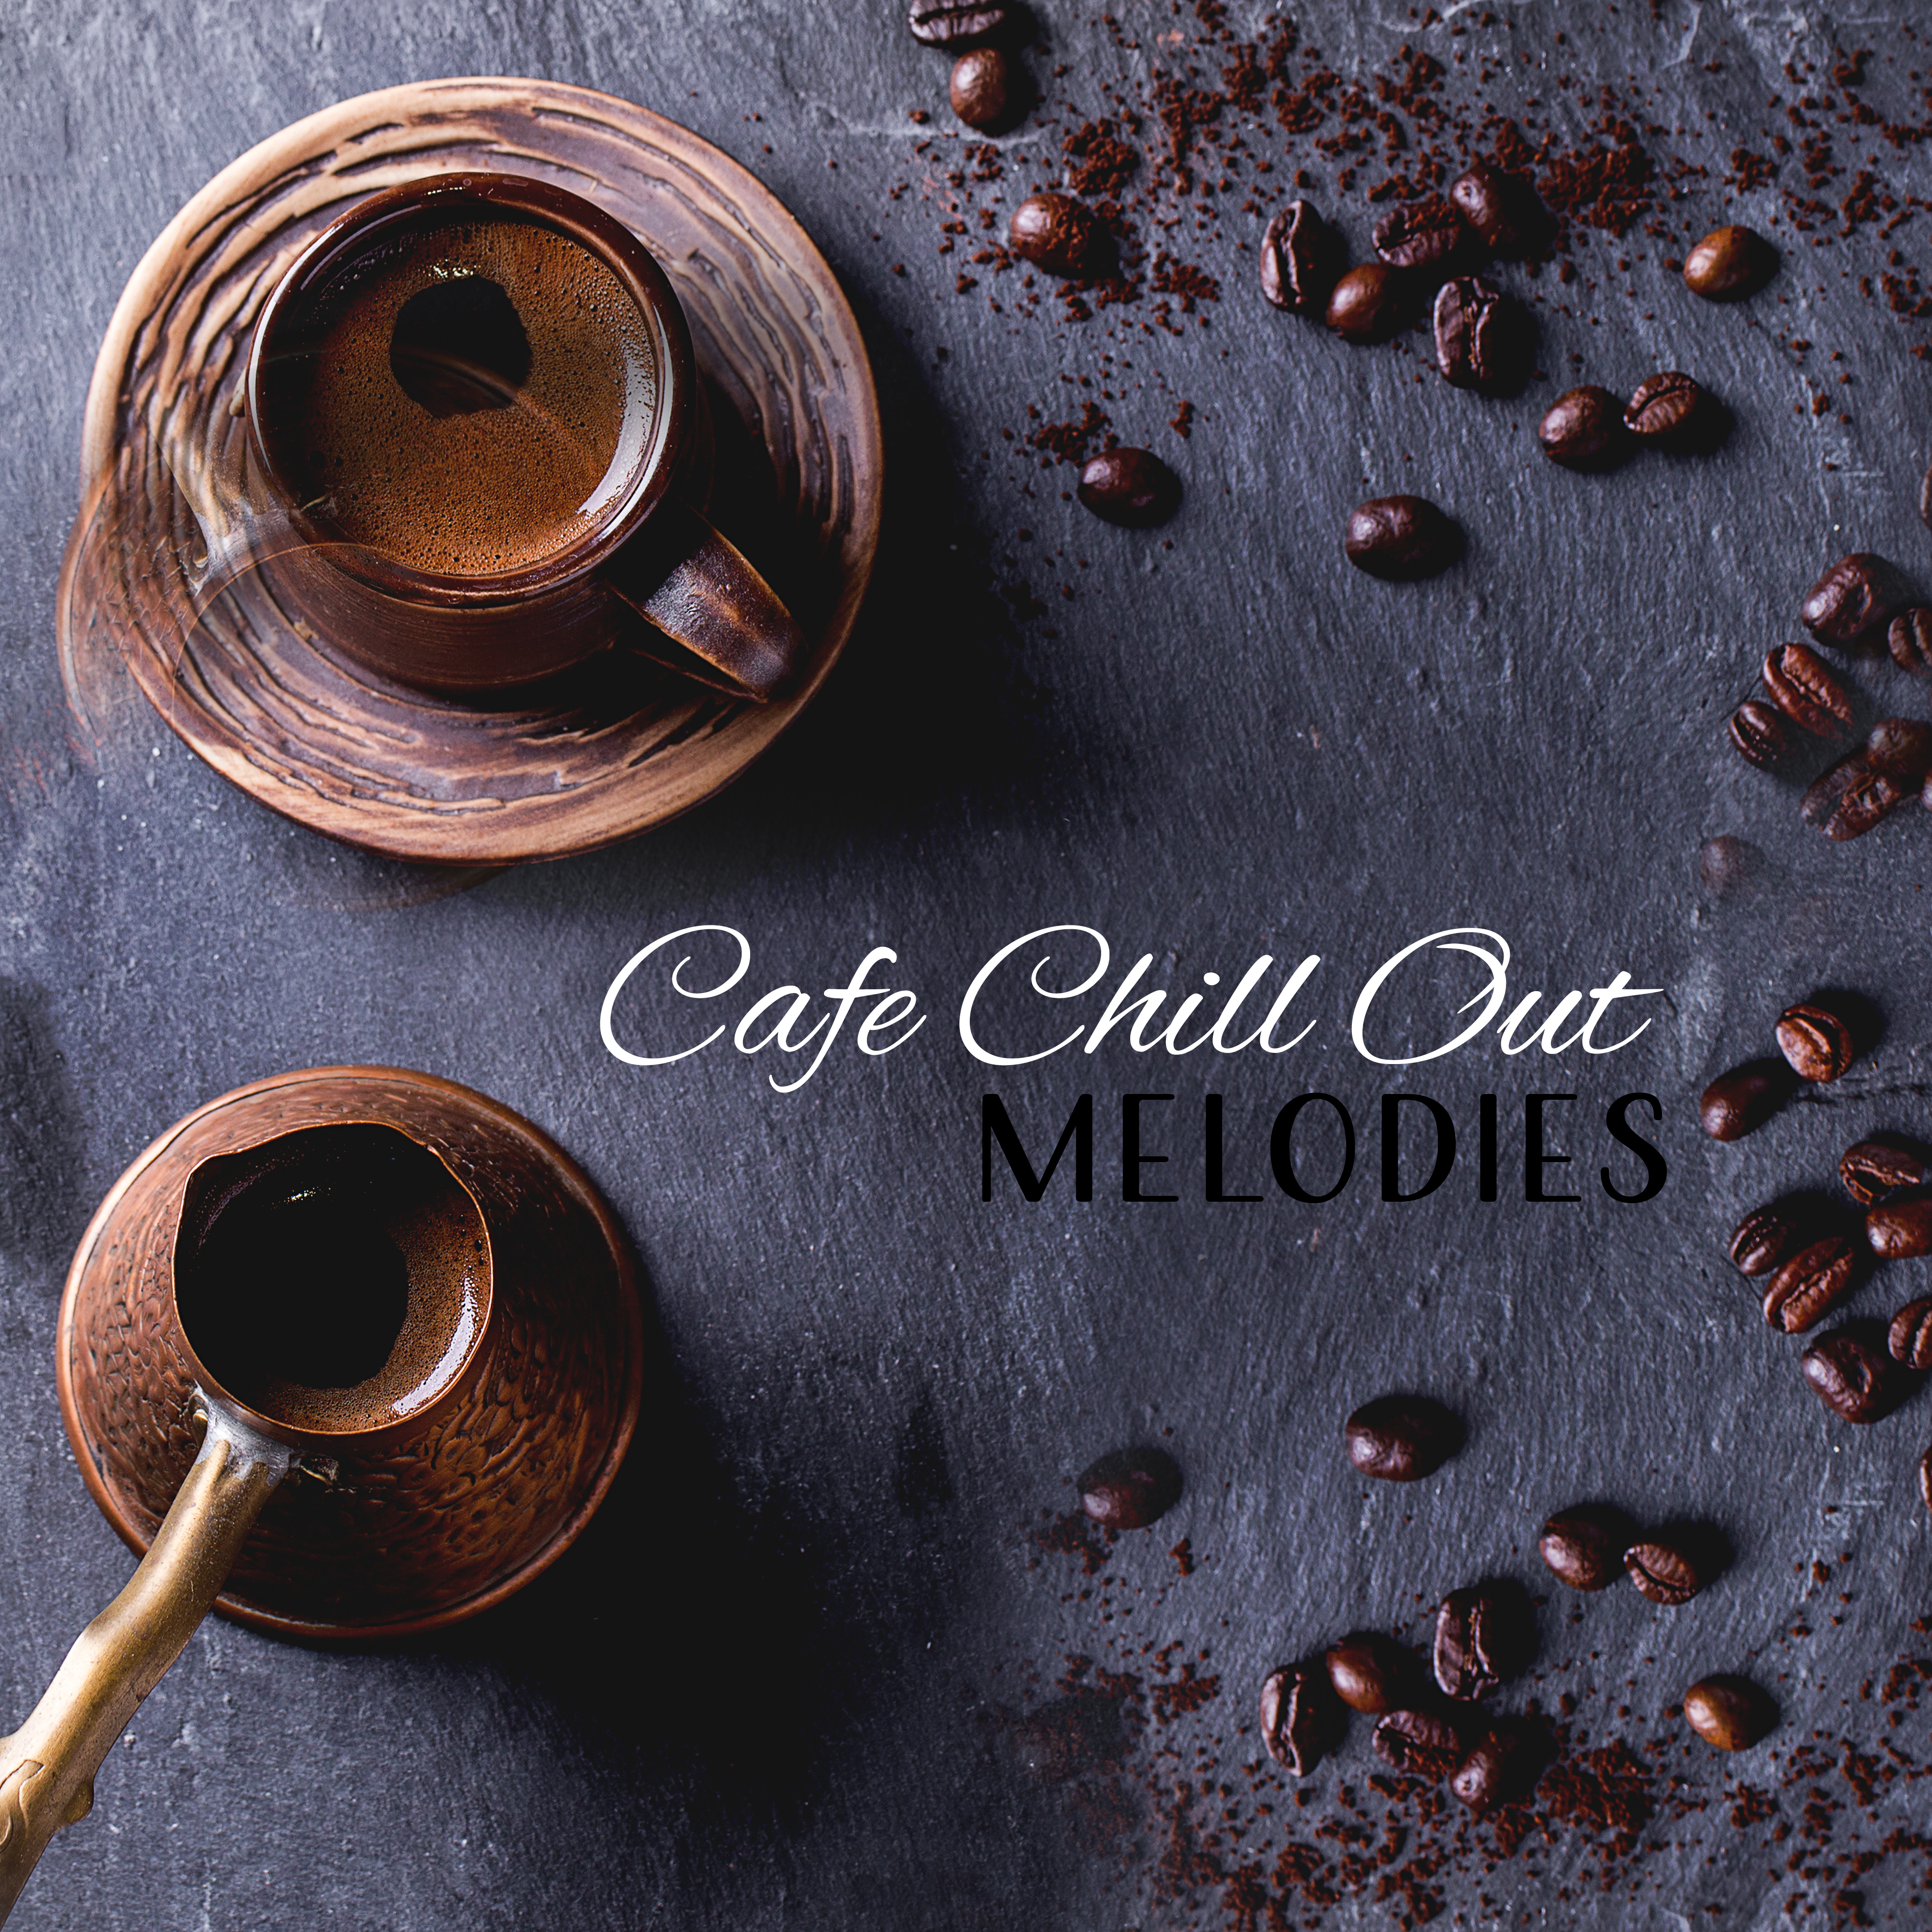 Cafe Chill Out Melodies  Soft Chill Out Beats, Background Music for Cafe Resutaurant, Chilled Melodies